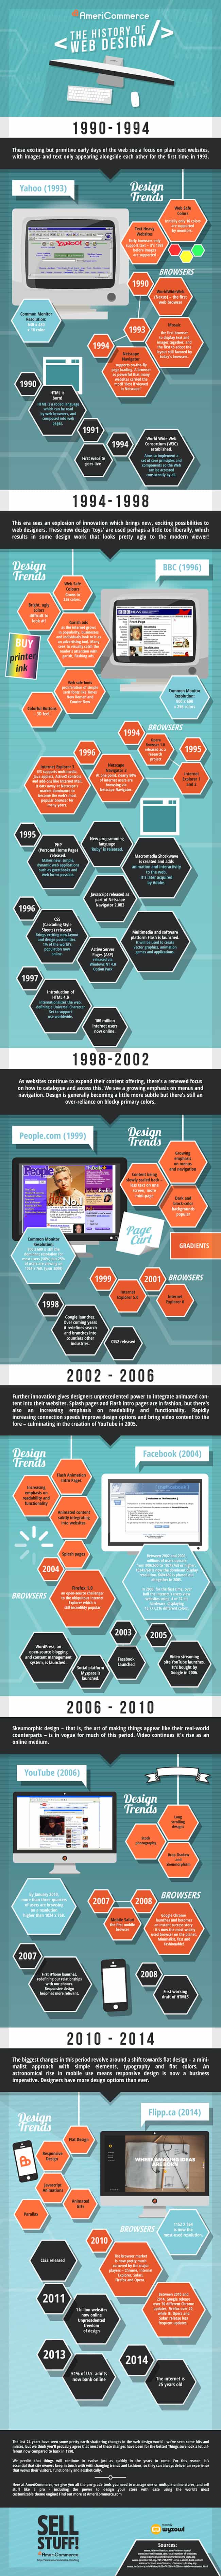 The history of web design